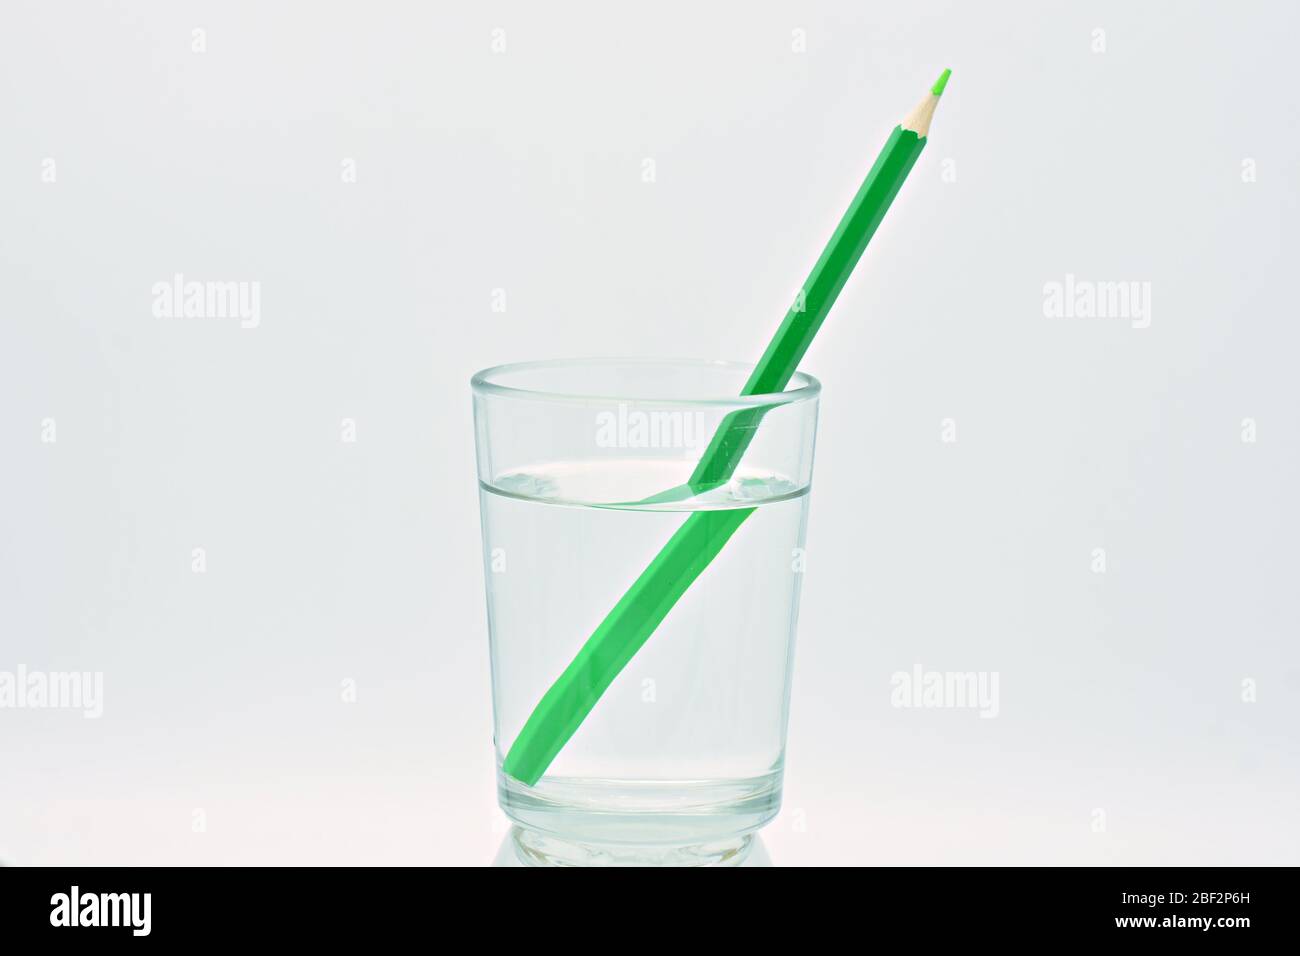 Yellow and green pencil, inside a glass filled with water, light refraction explanation Stock Photo